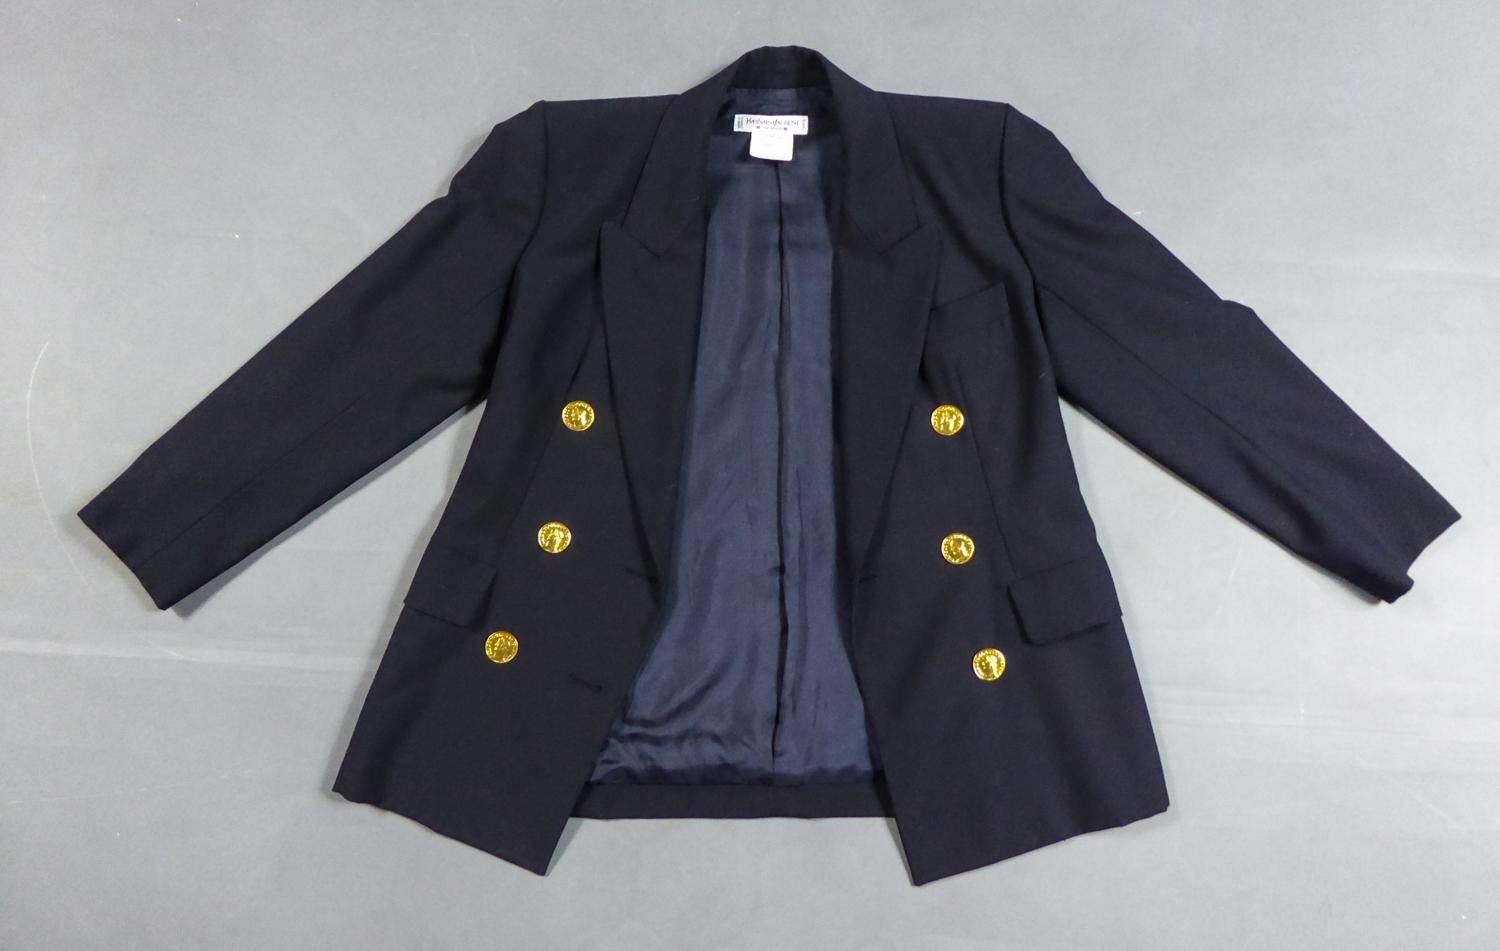 Circa 1990
France

Jacket in navy-blue woolen cloth by Yves Saint Laurent Rive Gauche from the 1990s. Obvious inspiration from the male wardrobe, whose fitted cut evokes the androgyny of the 1930s and Marlène Dietrich. Large collar with pointed